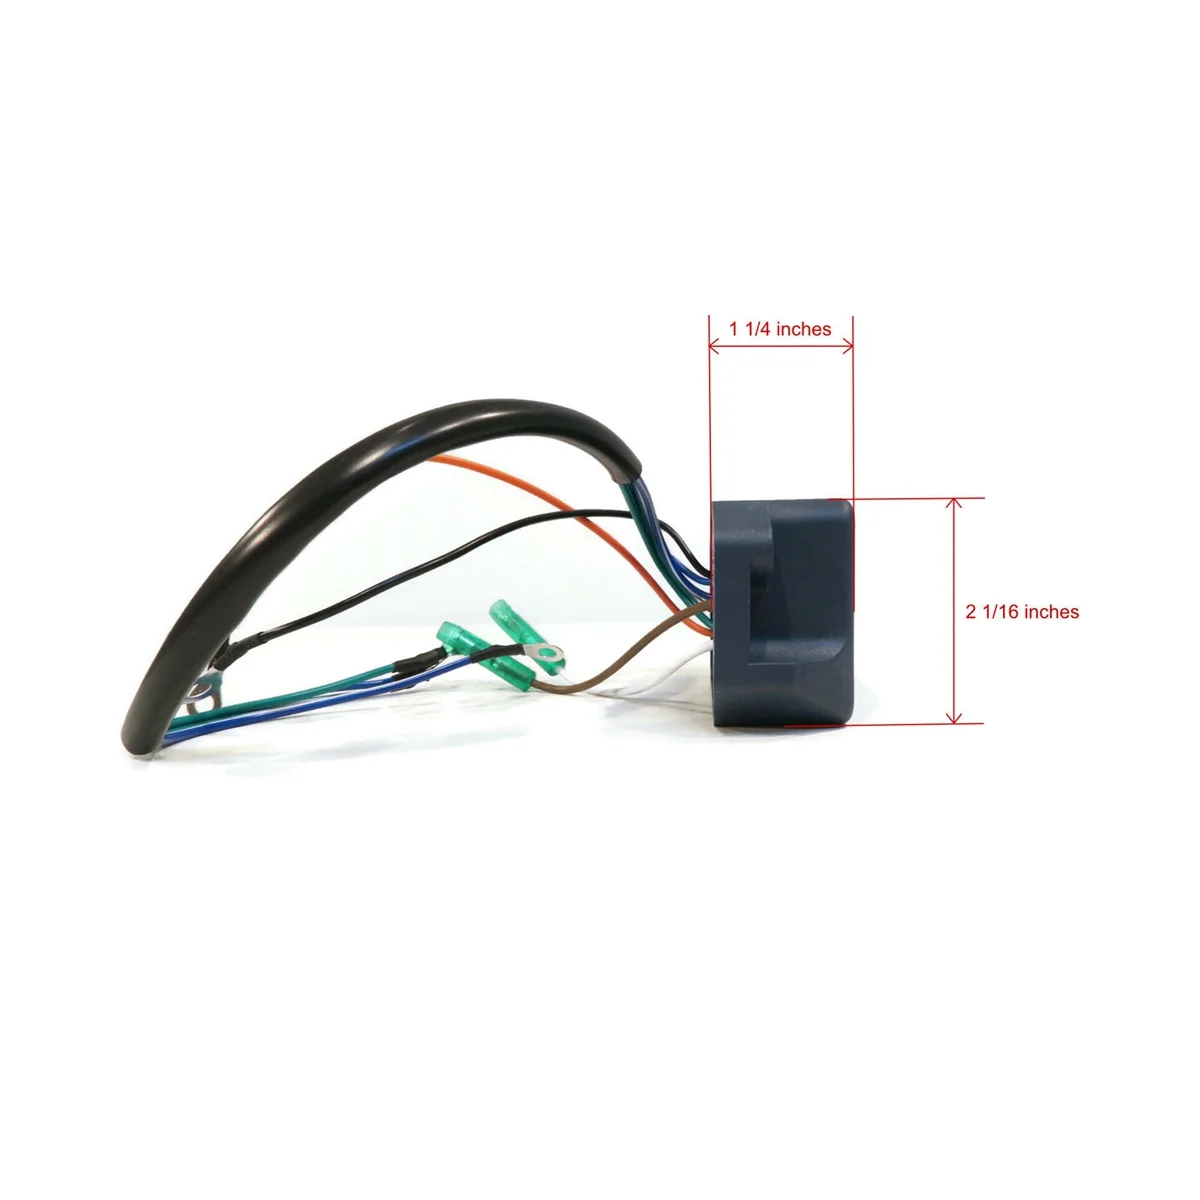 

339-6222A4 A6 A8 A10 Outboard Switch Box CDI Power Pack for Mercury 4 7.5 9.8 20HP 2Cyl 1973-1985